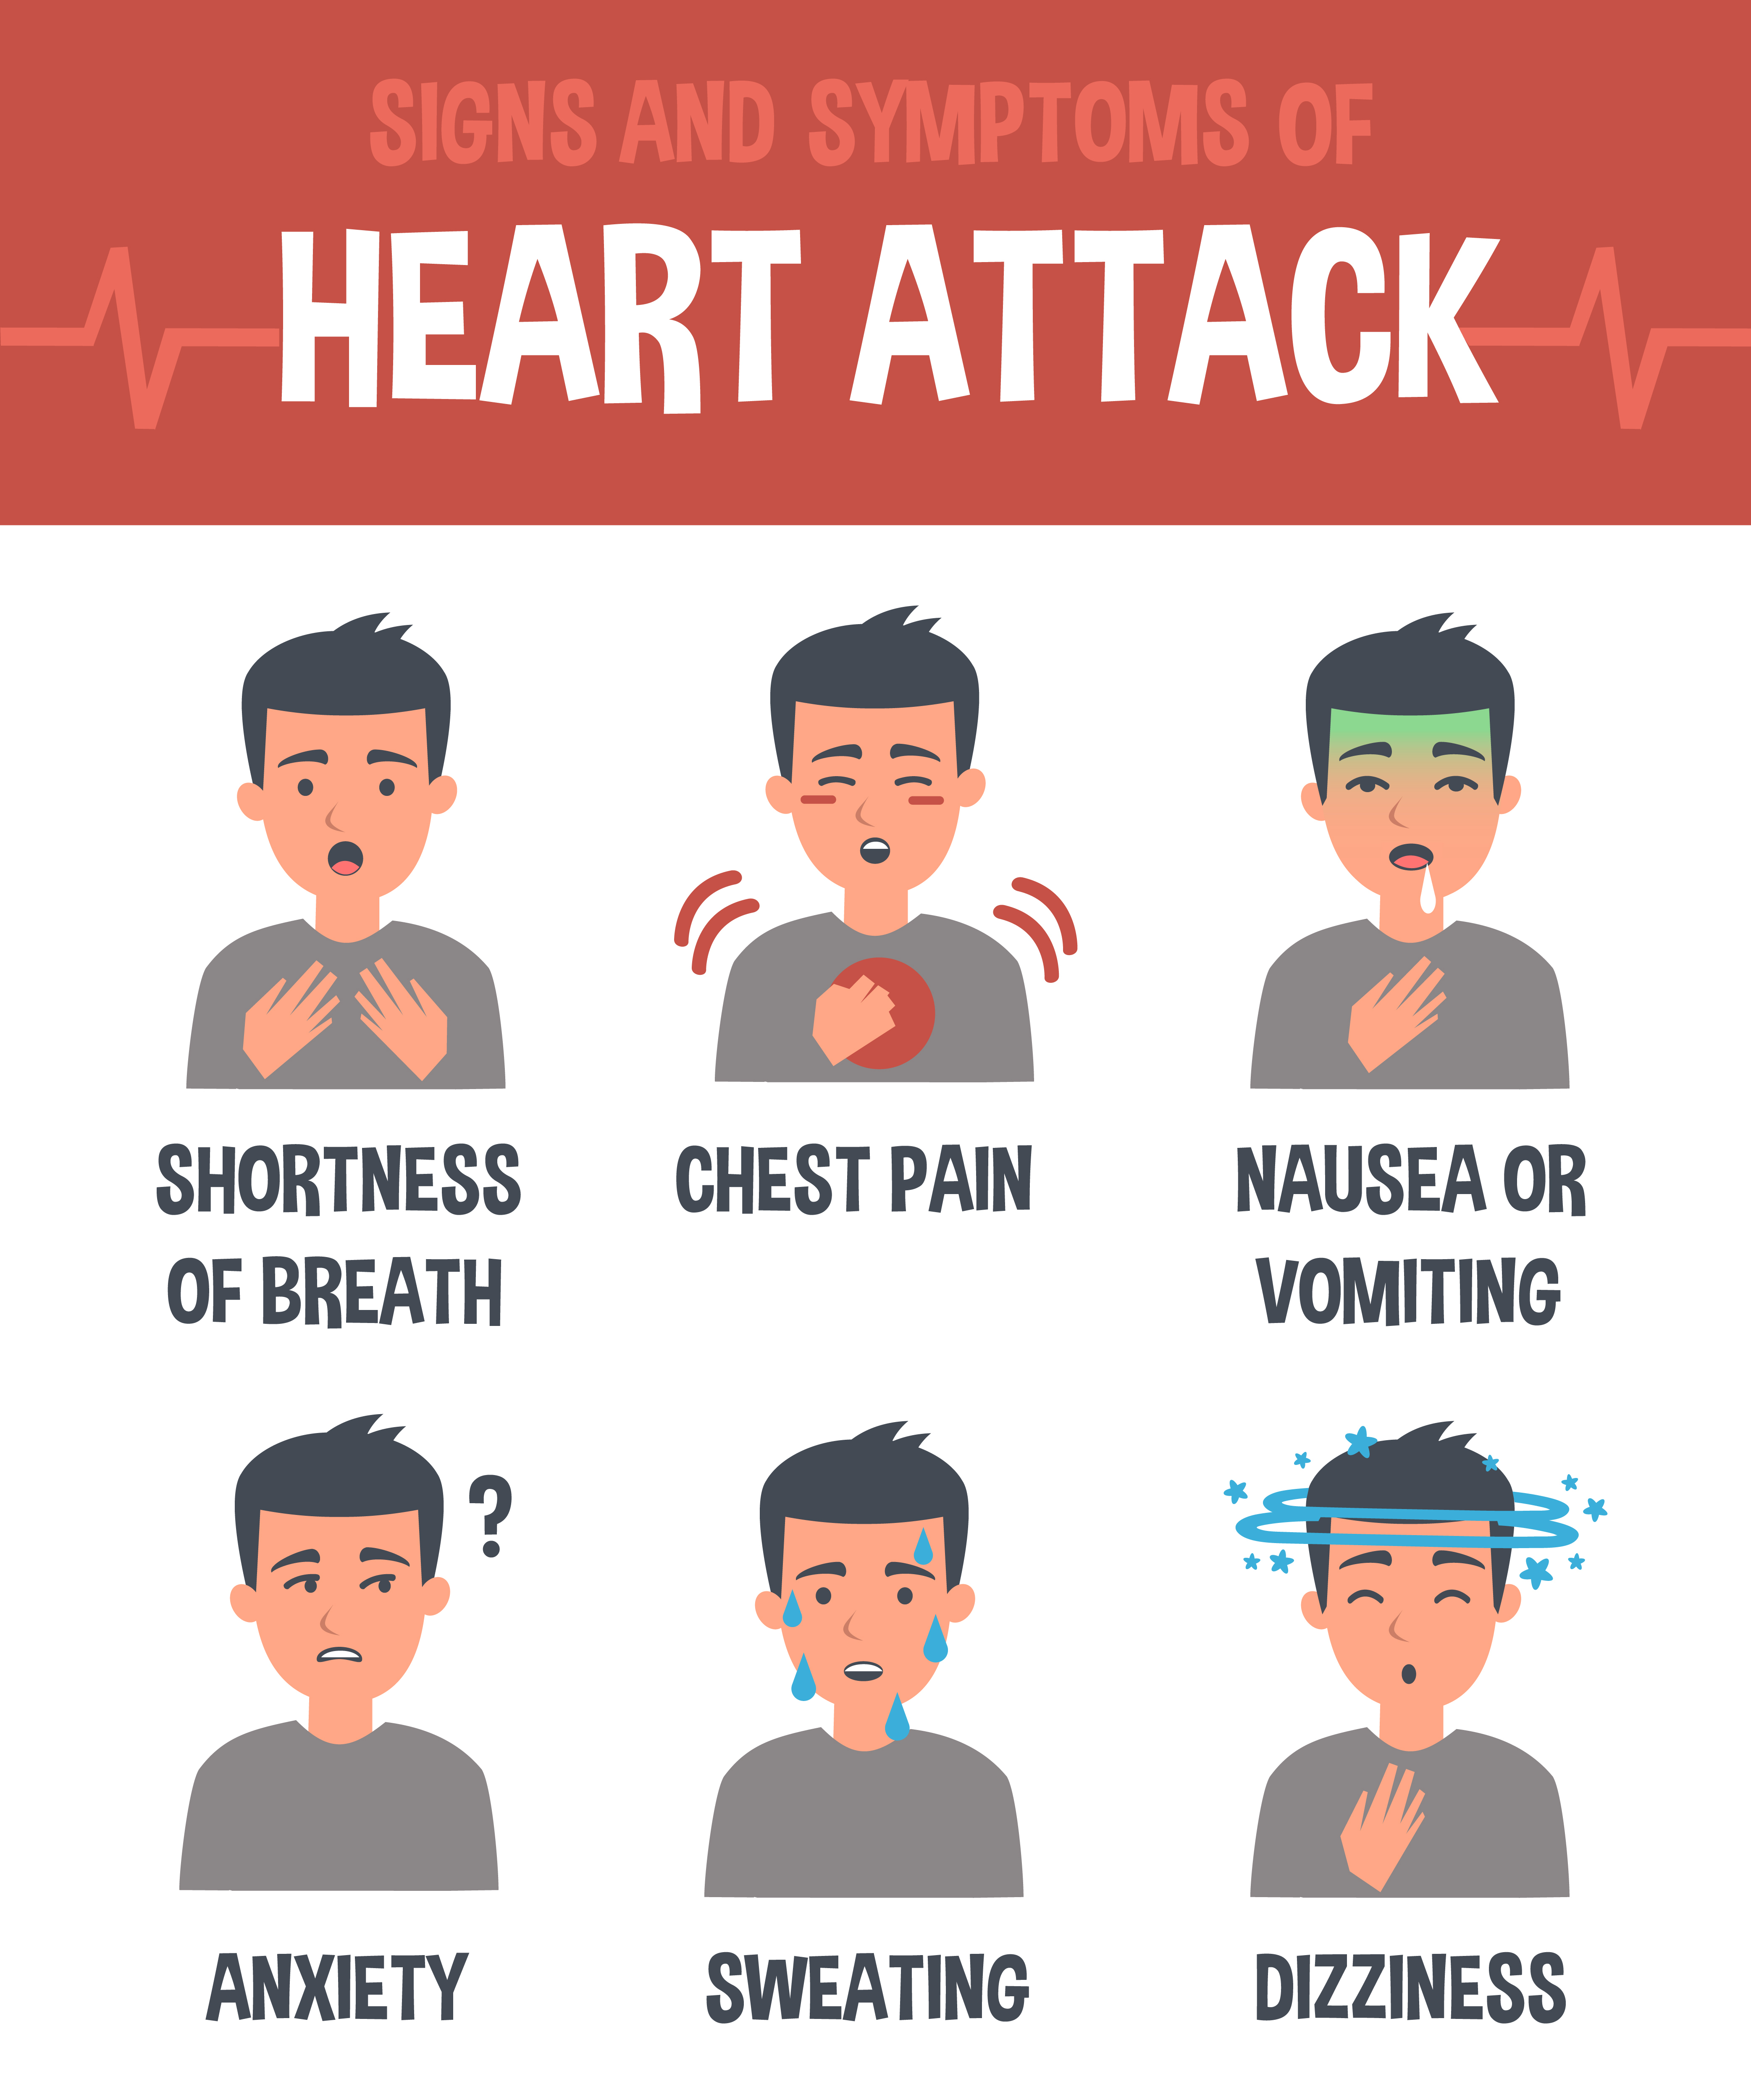 Heart Attack - First Aid Wiki